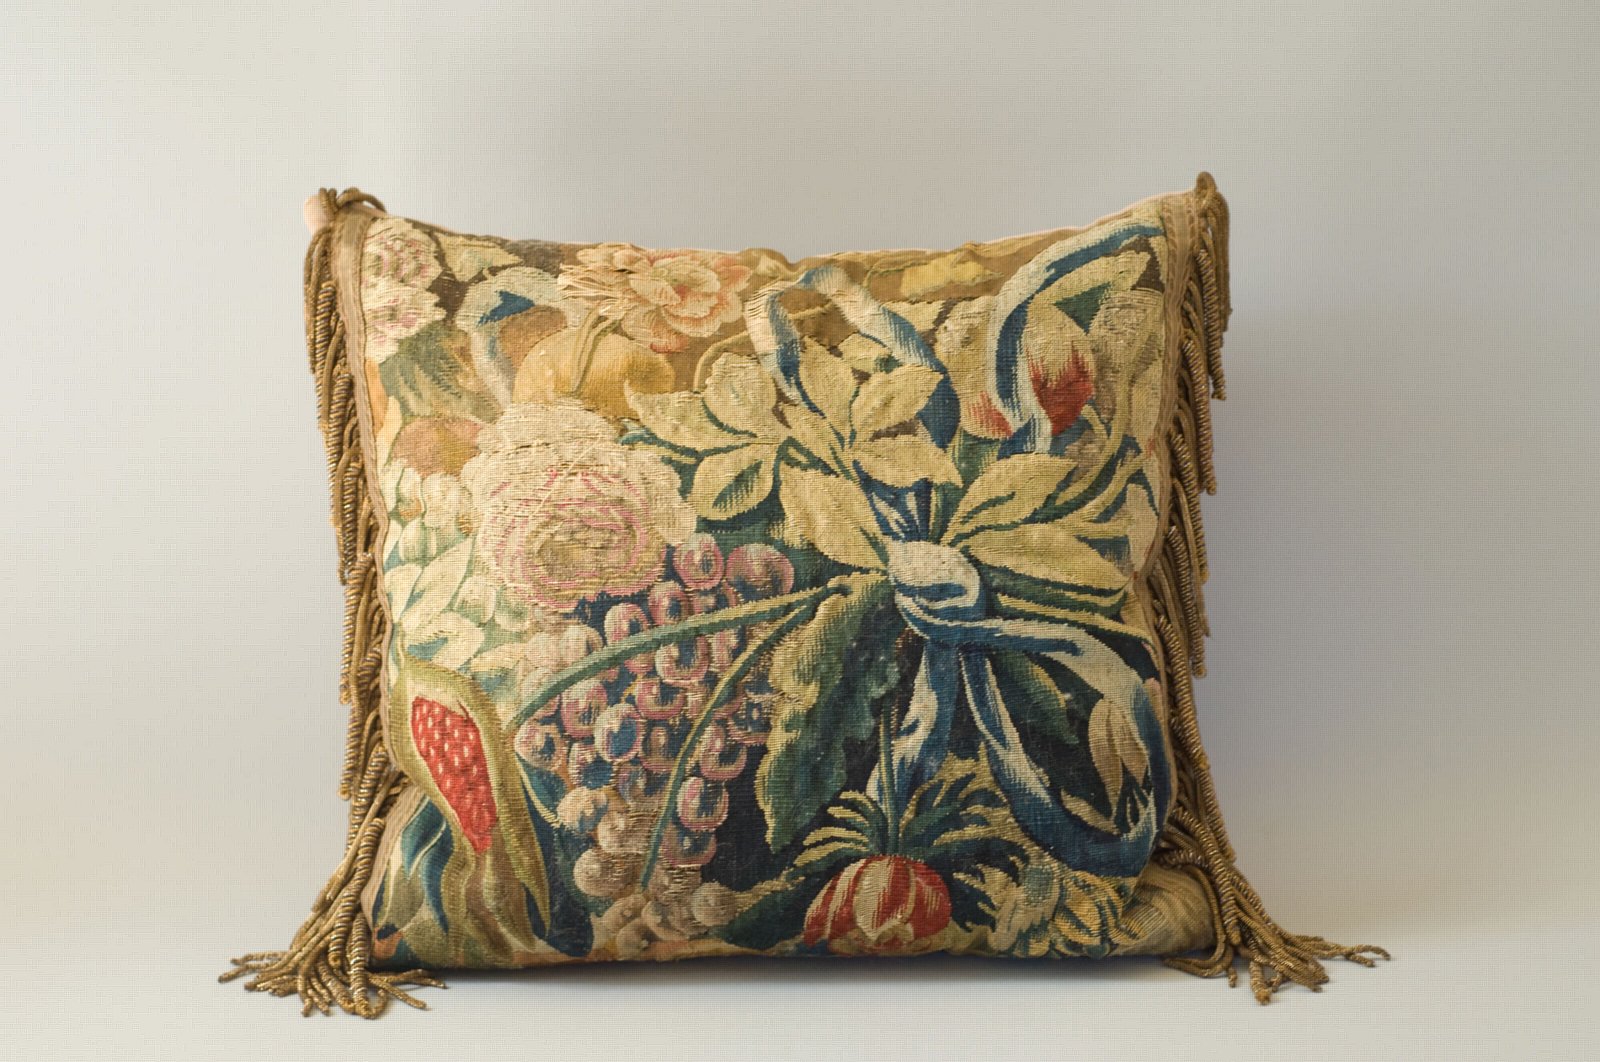 Early 17th Century, Brussels Tapestry Fragments Made into Modern Cushions